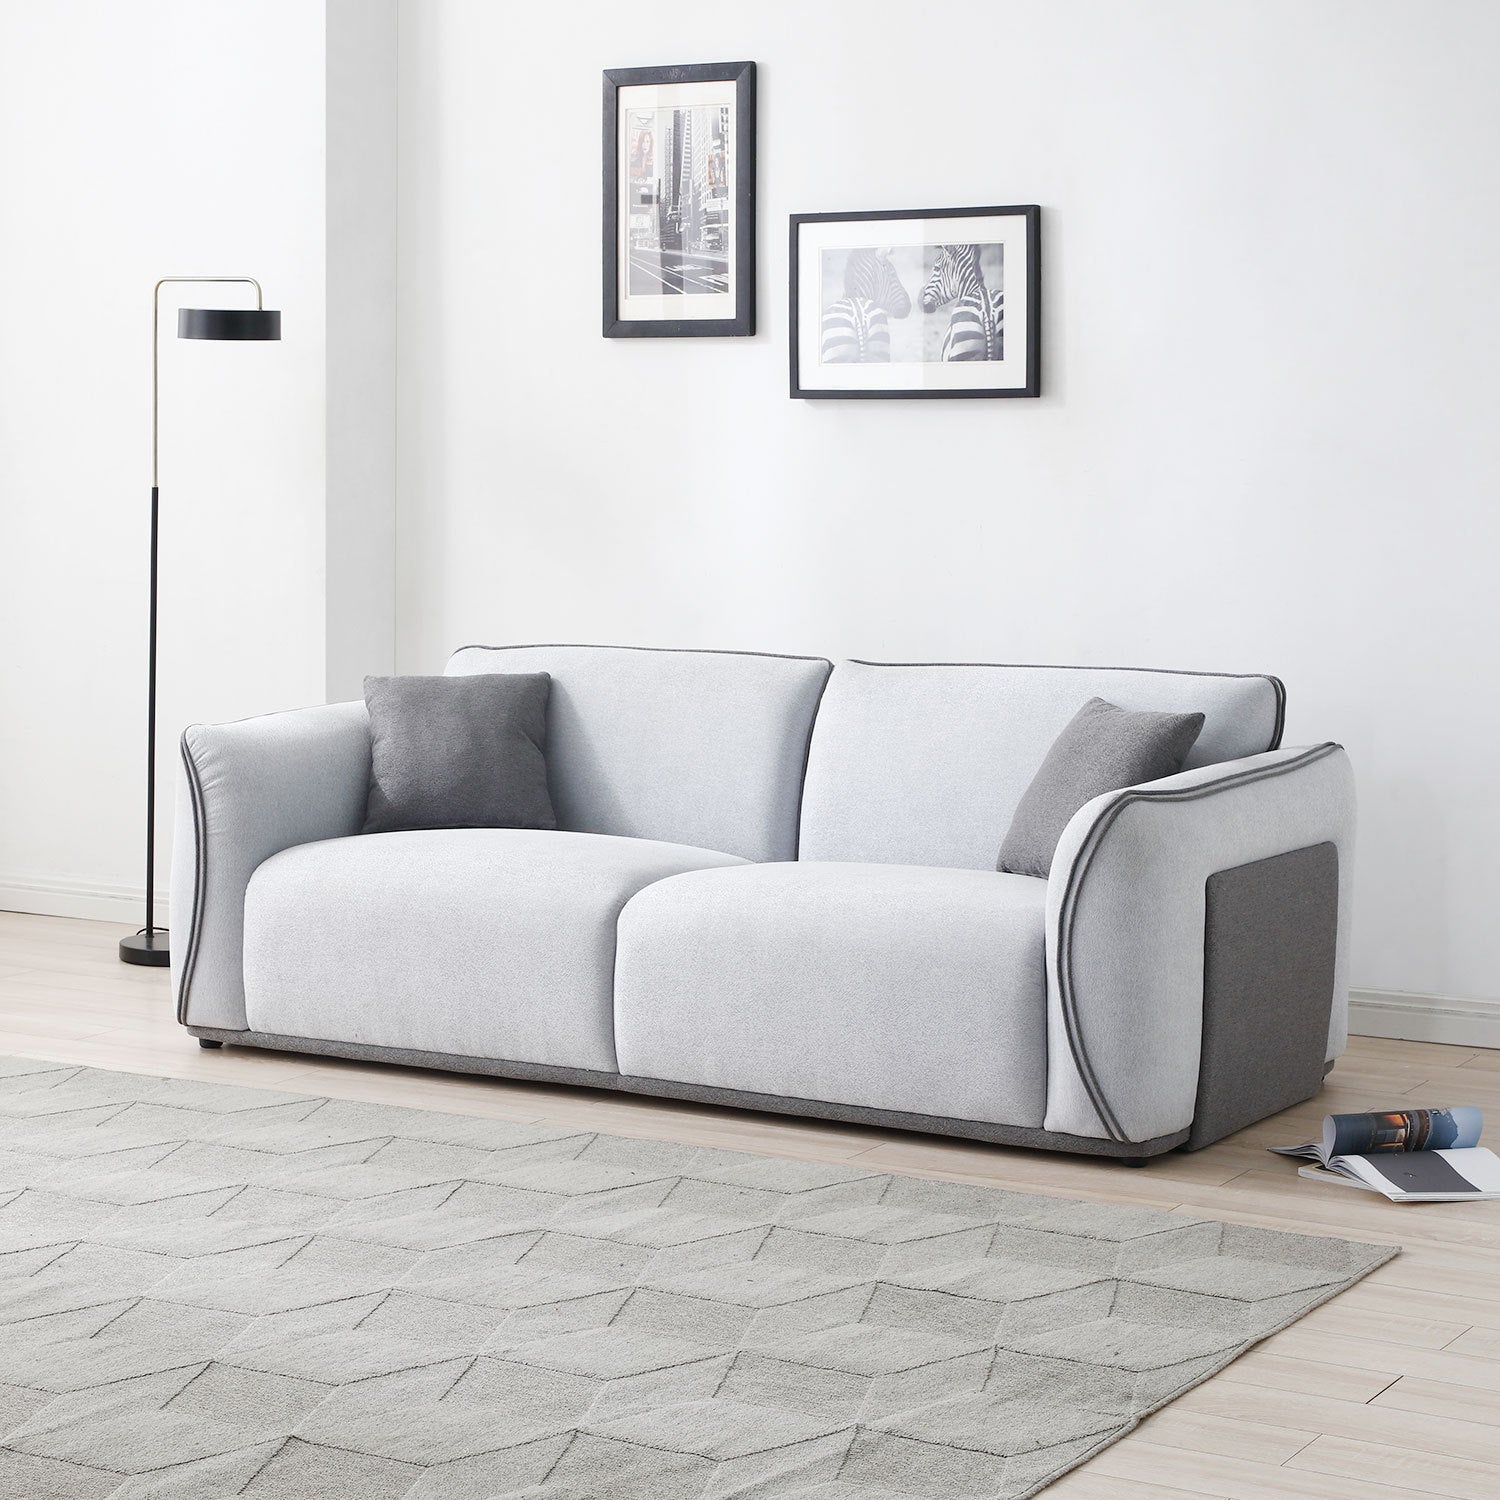 Grey Couch Upholstered Sofa, Modern Sofa for Living Room, Couch for Small Spaces. - Enova Luxe Home Store